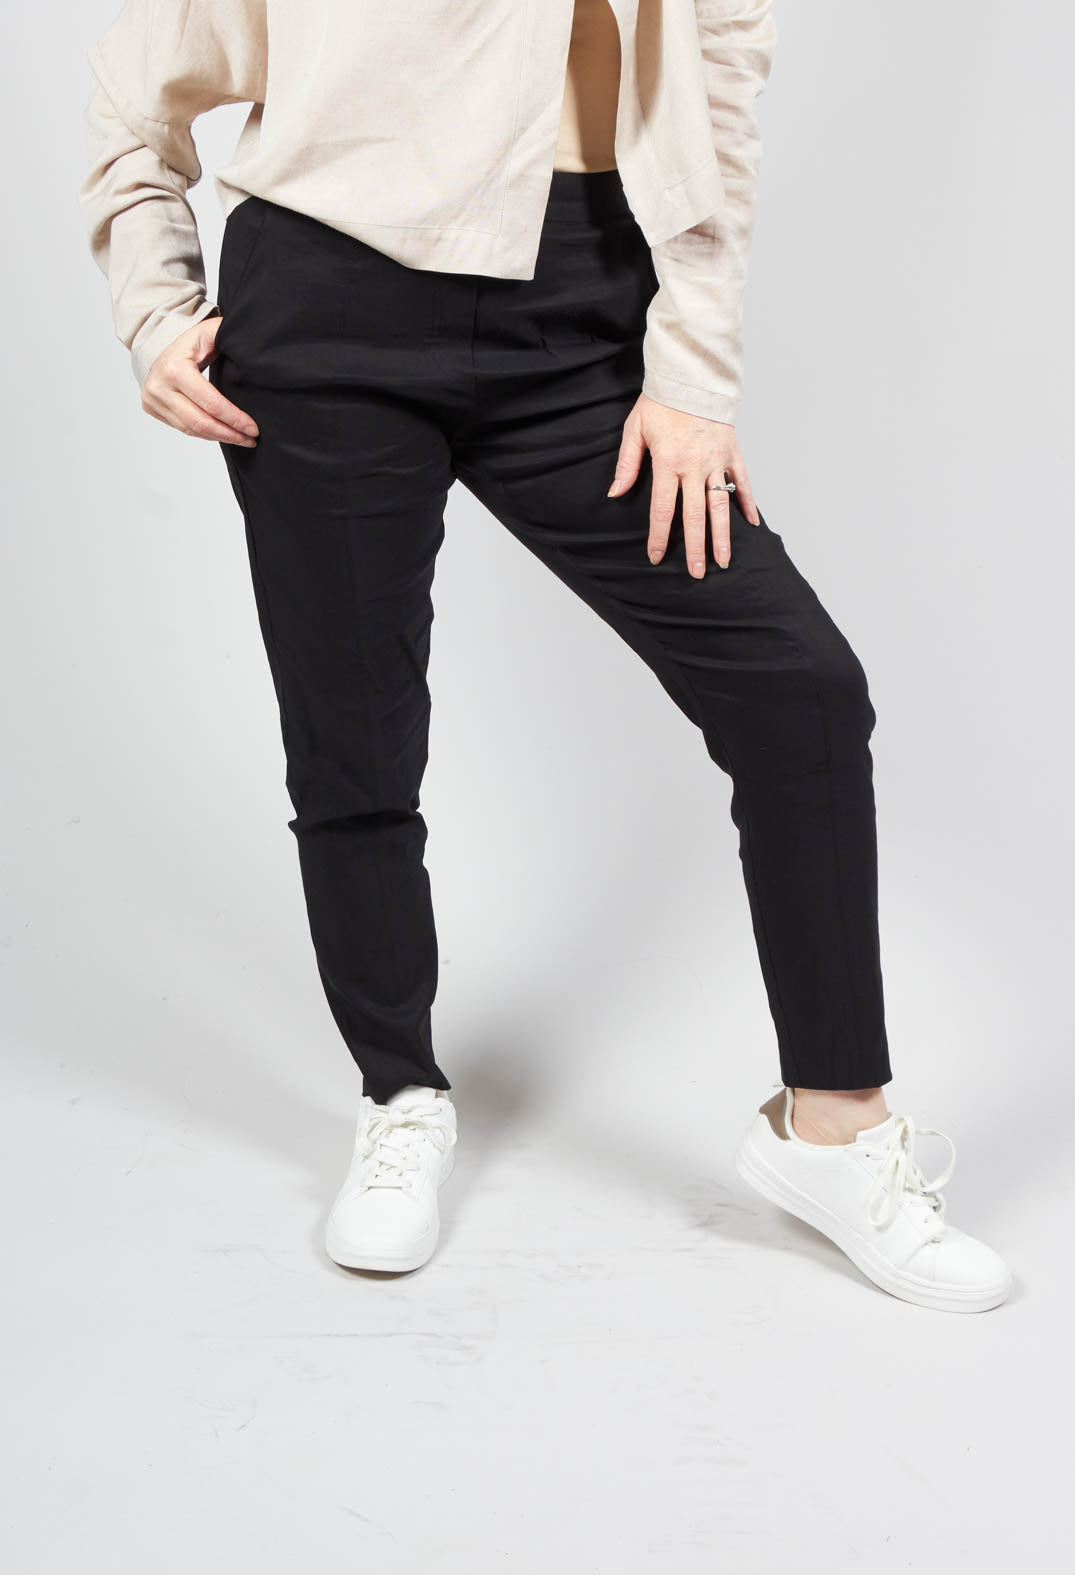 Pull on Trousers with Side Pockets in Black